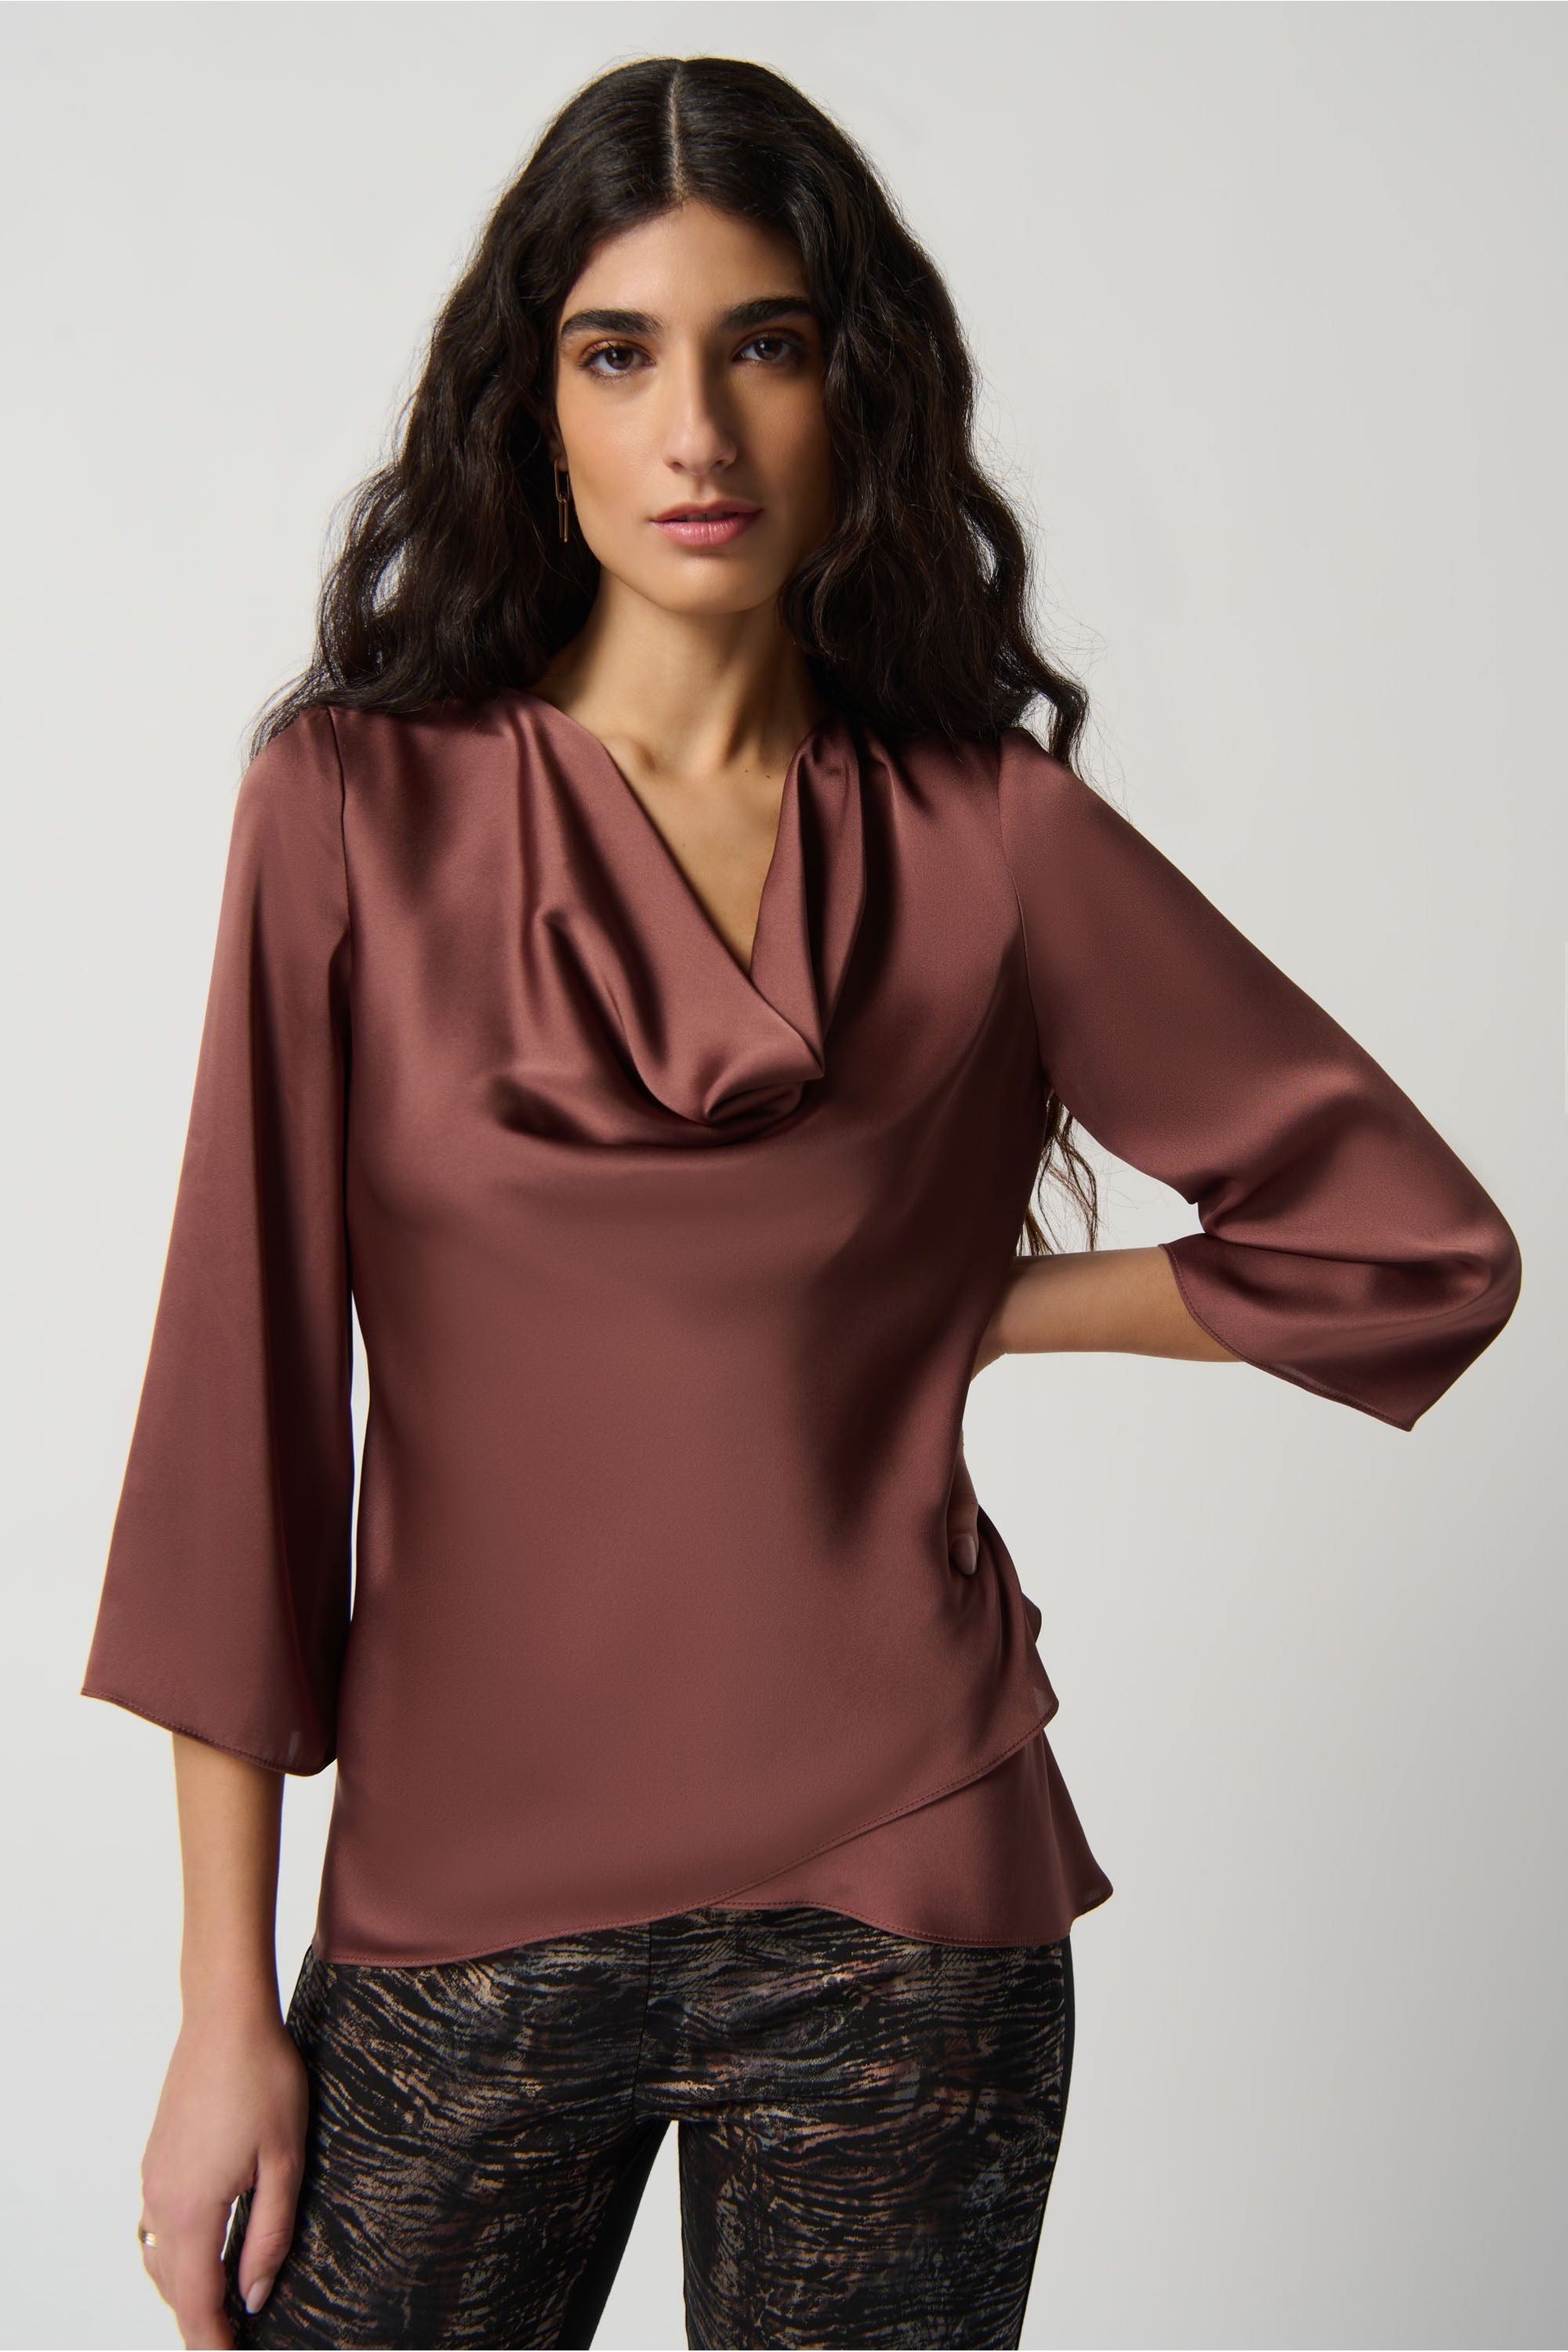 JR Cowl Neckline Satin Flared Top - Style 234082, front, toffee